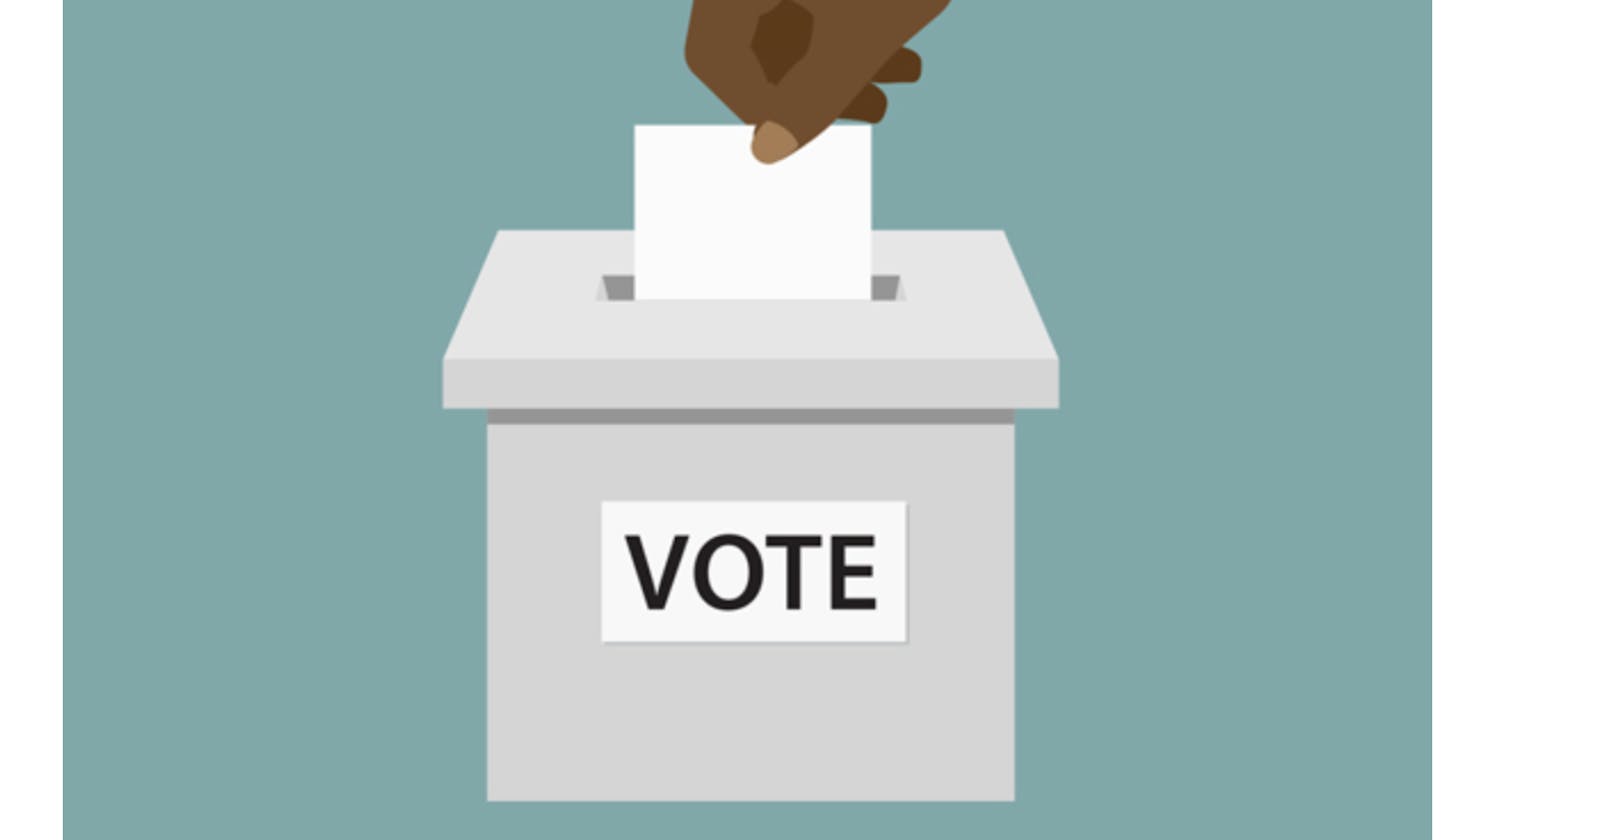 Build a decentralized voting app with Choice Coin and Javascript algorand SDK using NodeJS📨